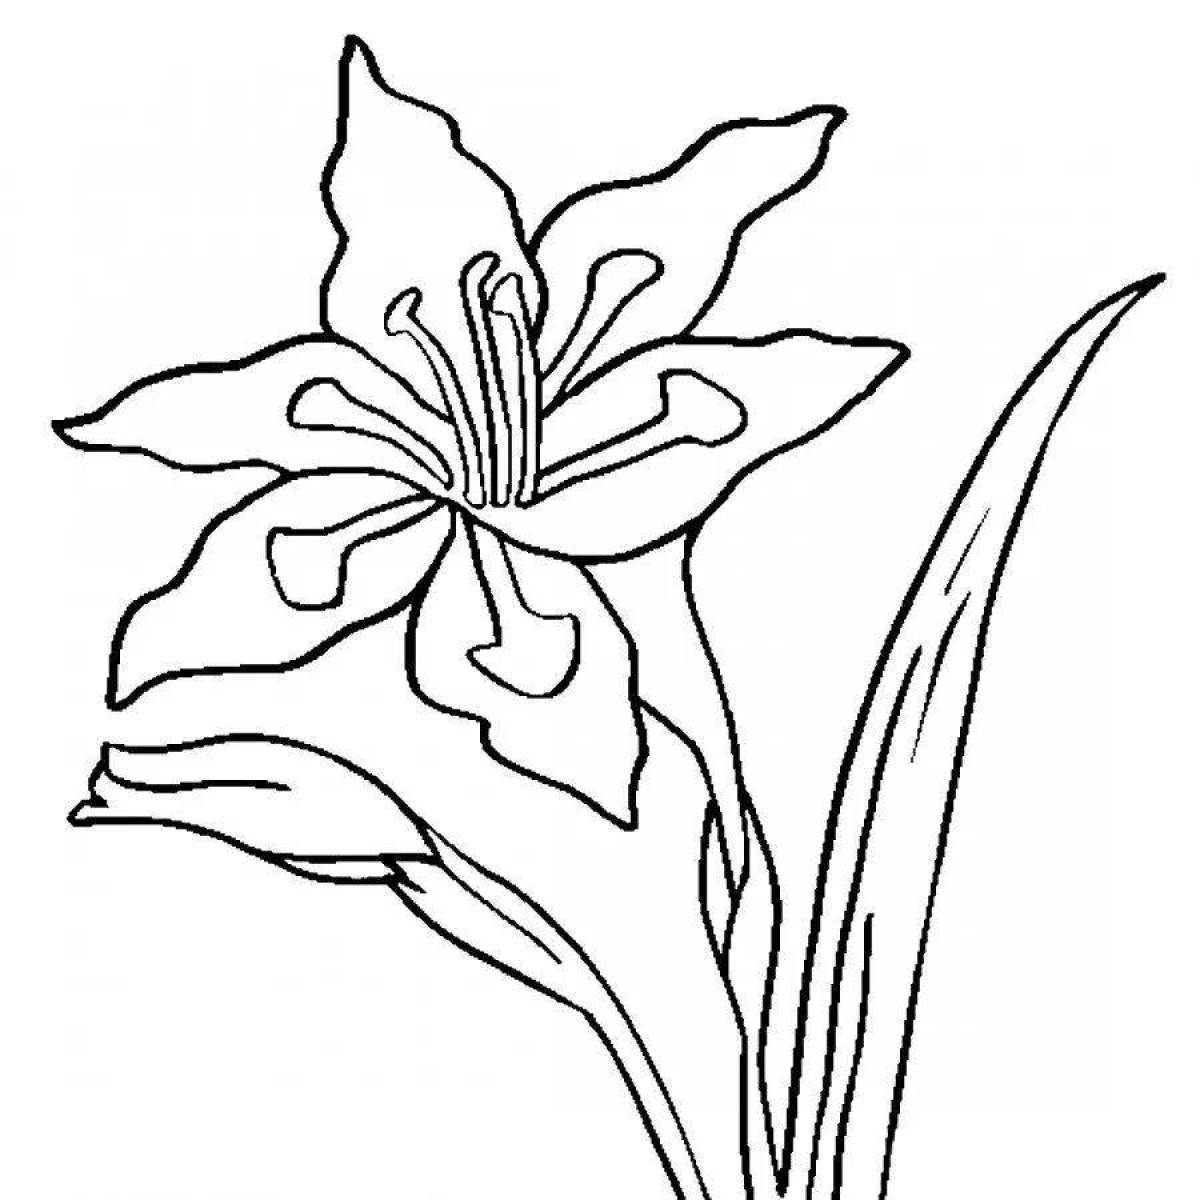 Dazzling lily coloring pages for kids